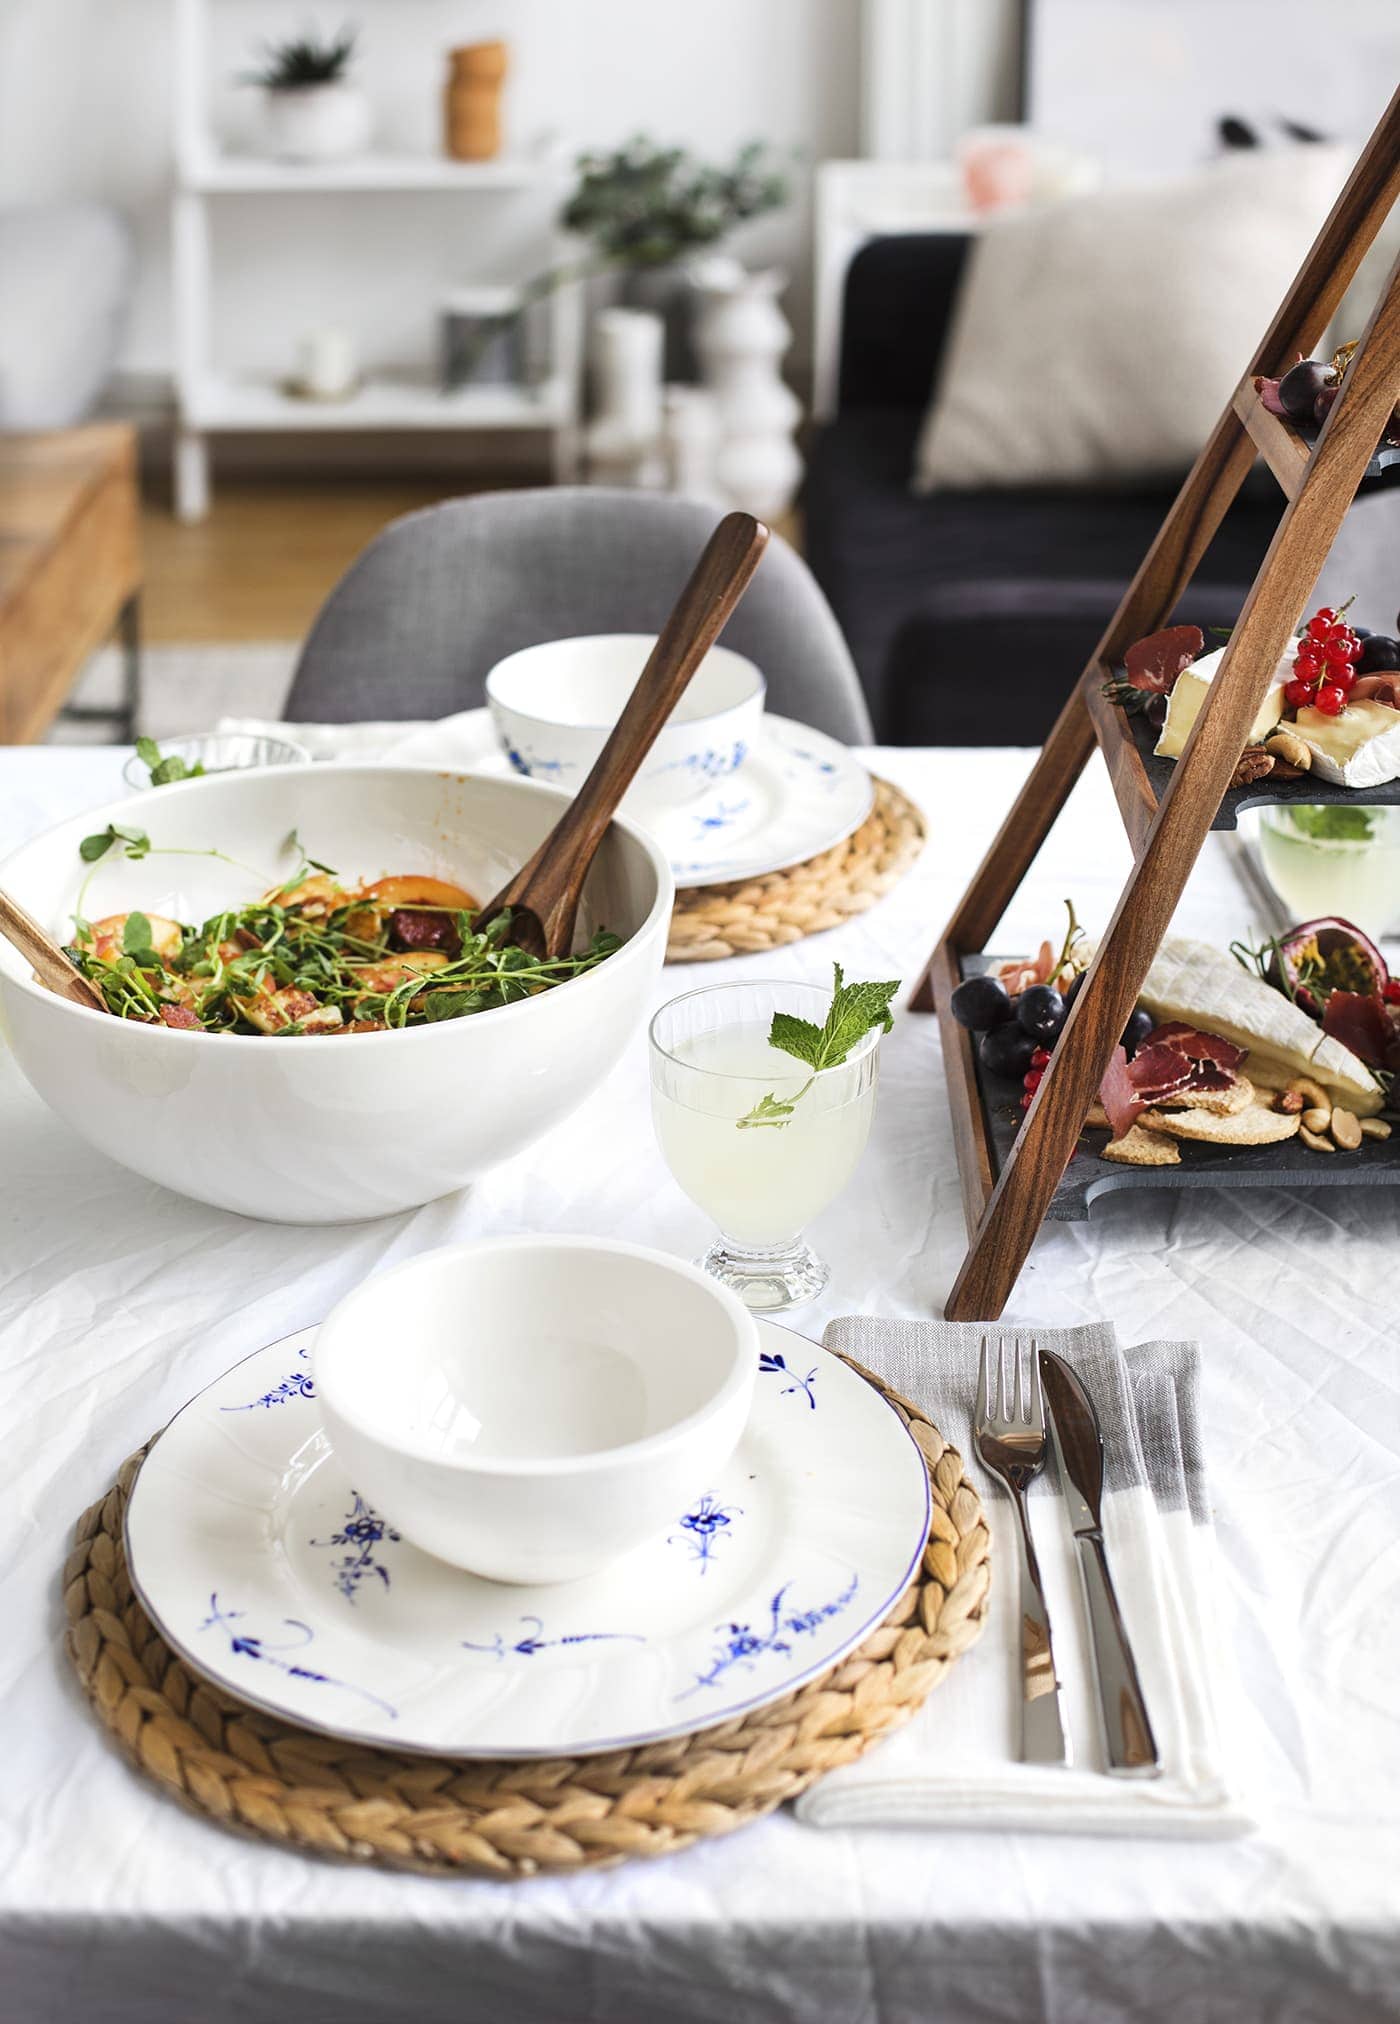 Mix ’n’ Match, Old & New: Casual Dinner with Villeroy & Boch